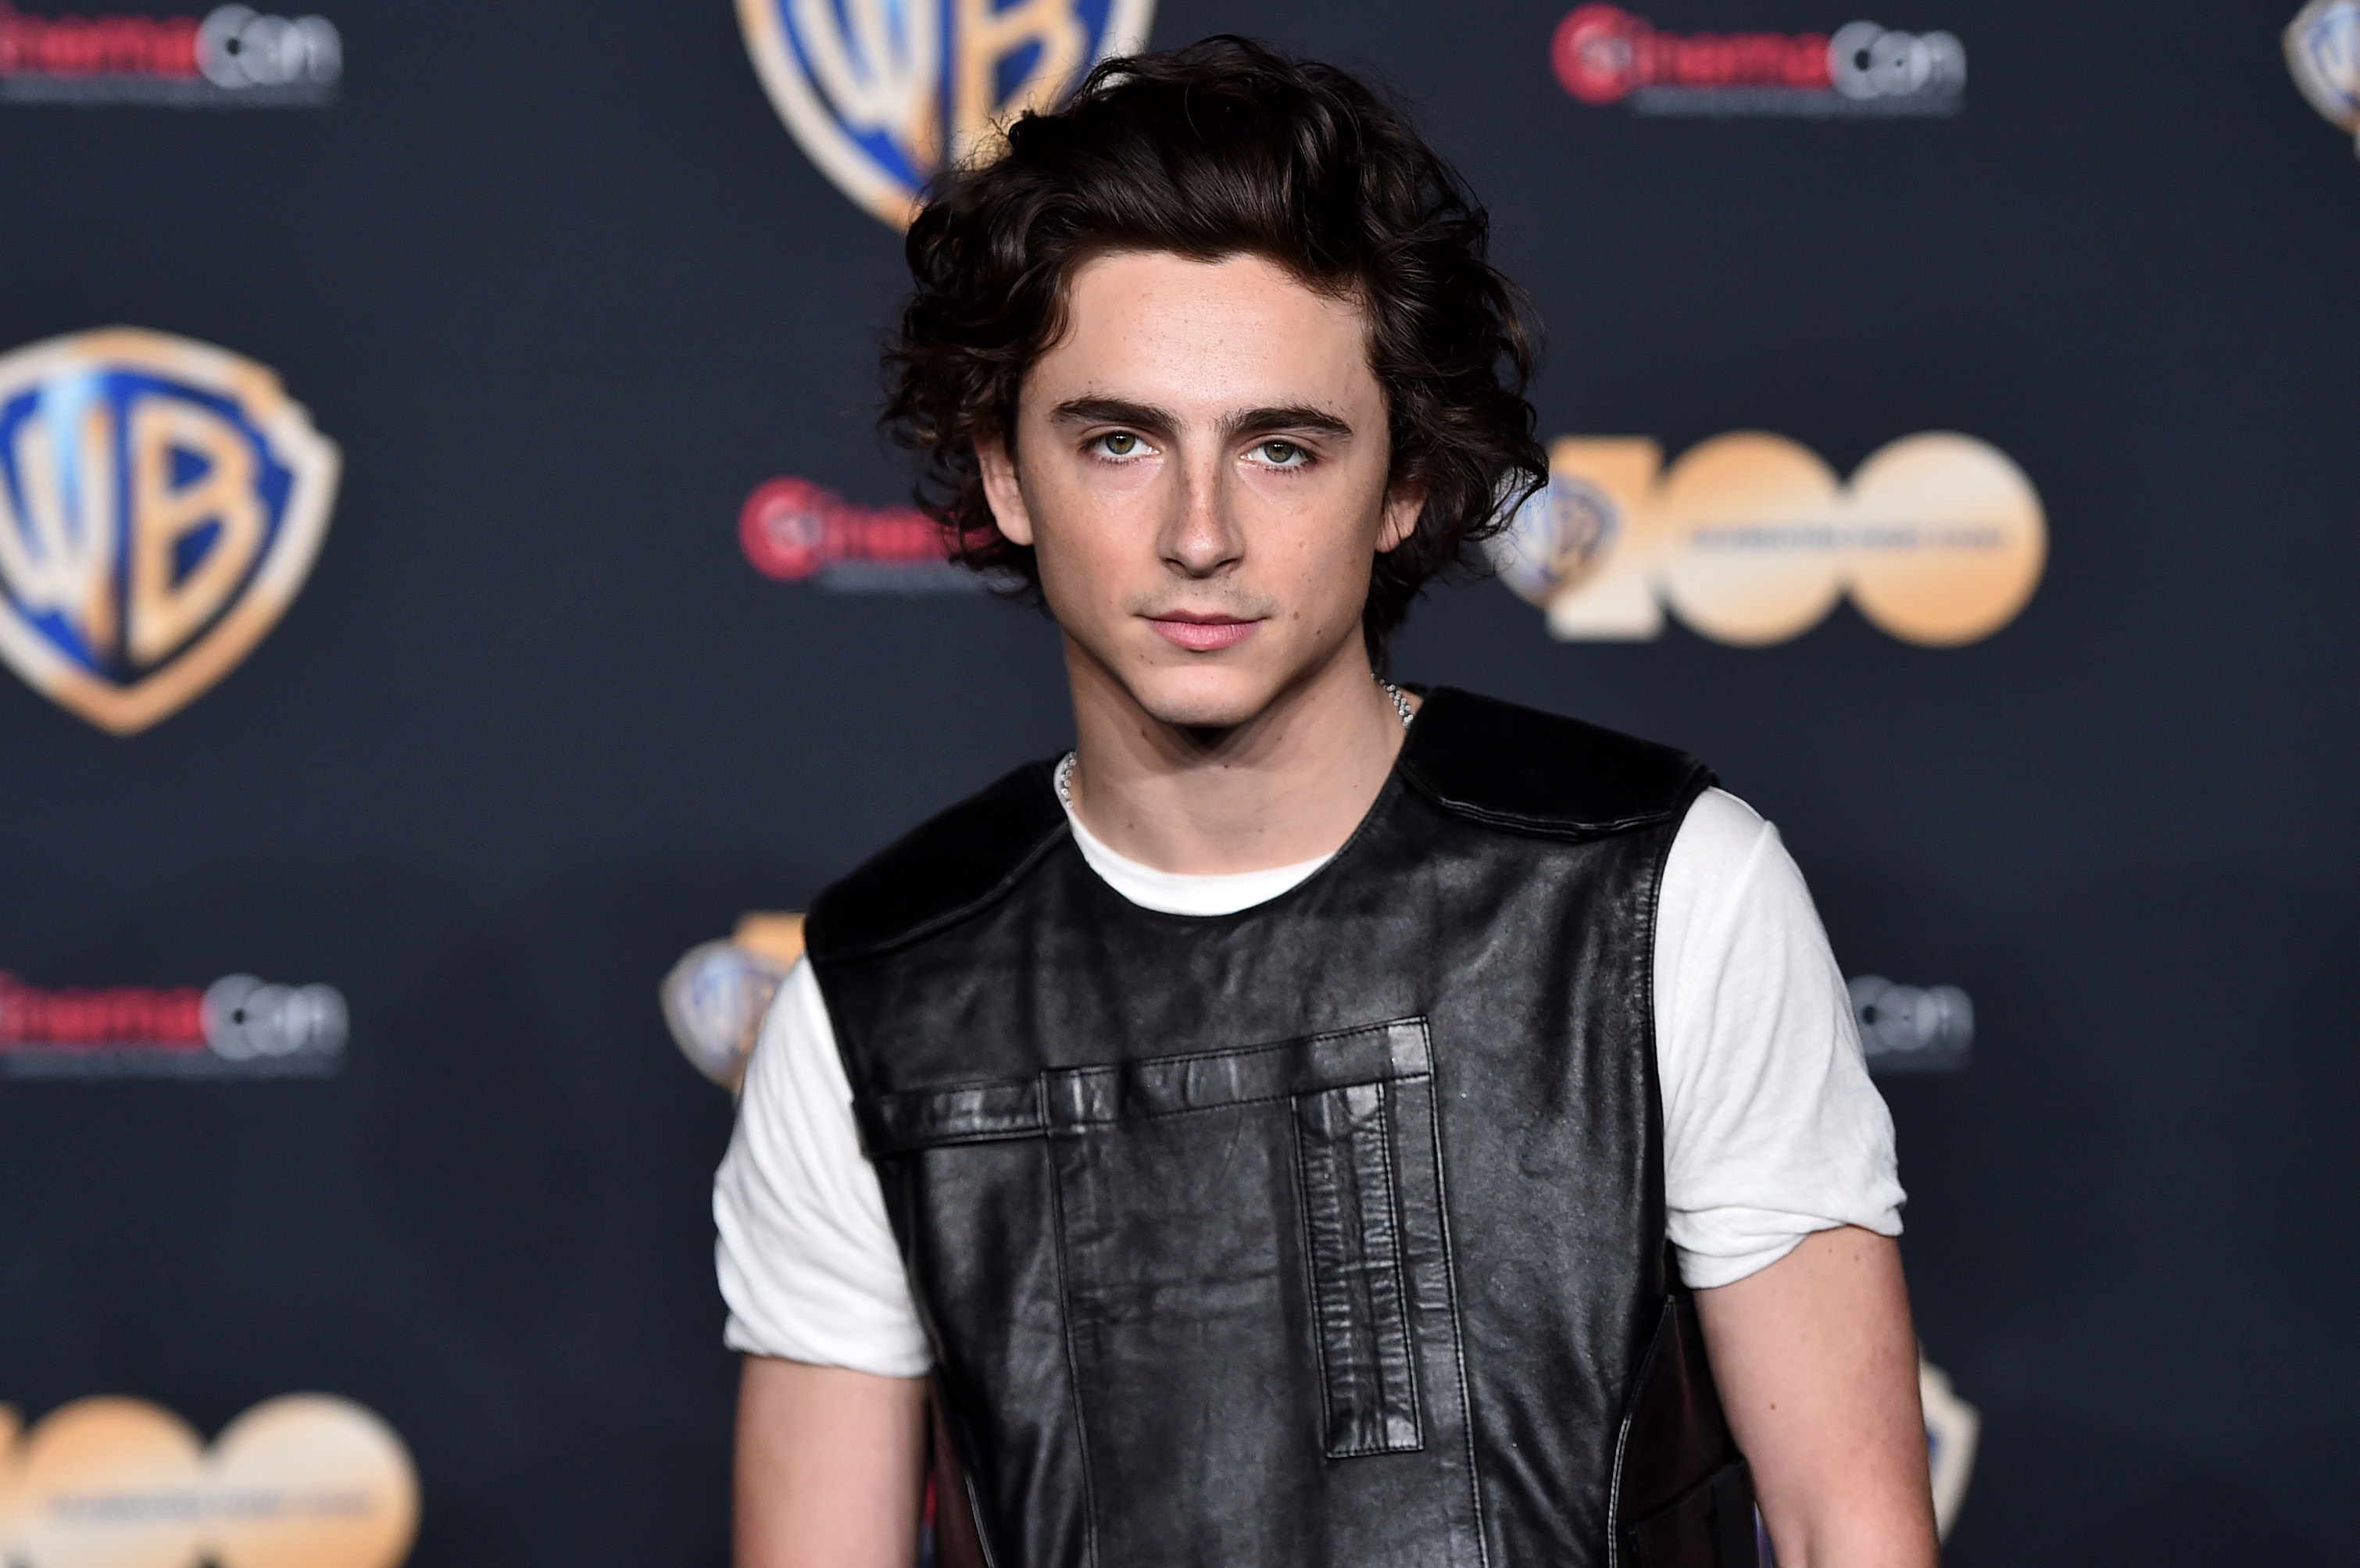 Last month, the Hulu star sparked rumors that she and Timothee had secretly split